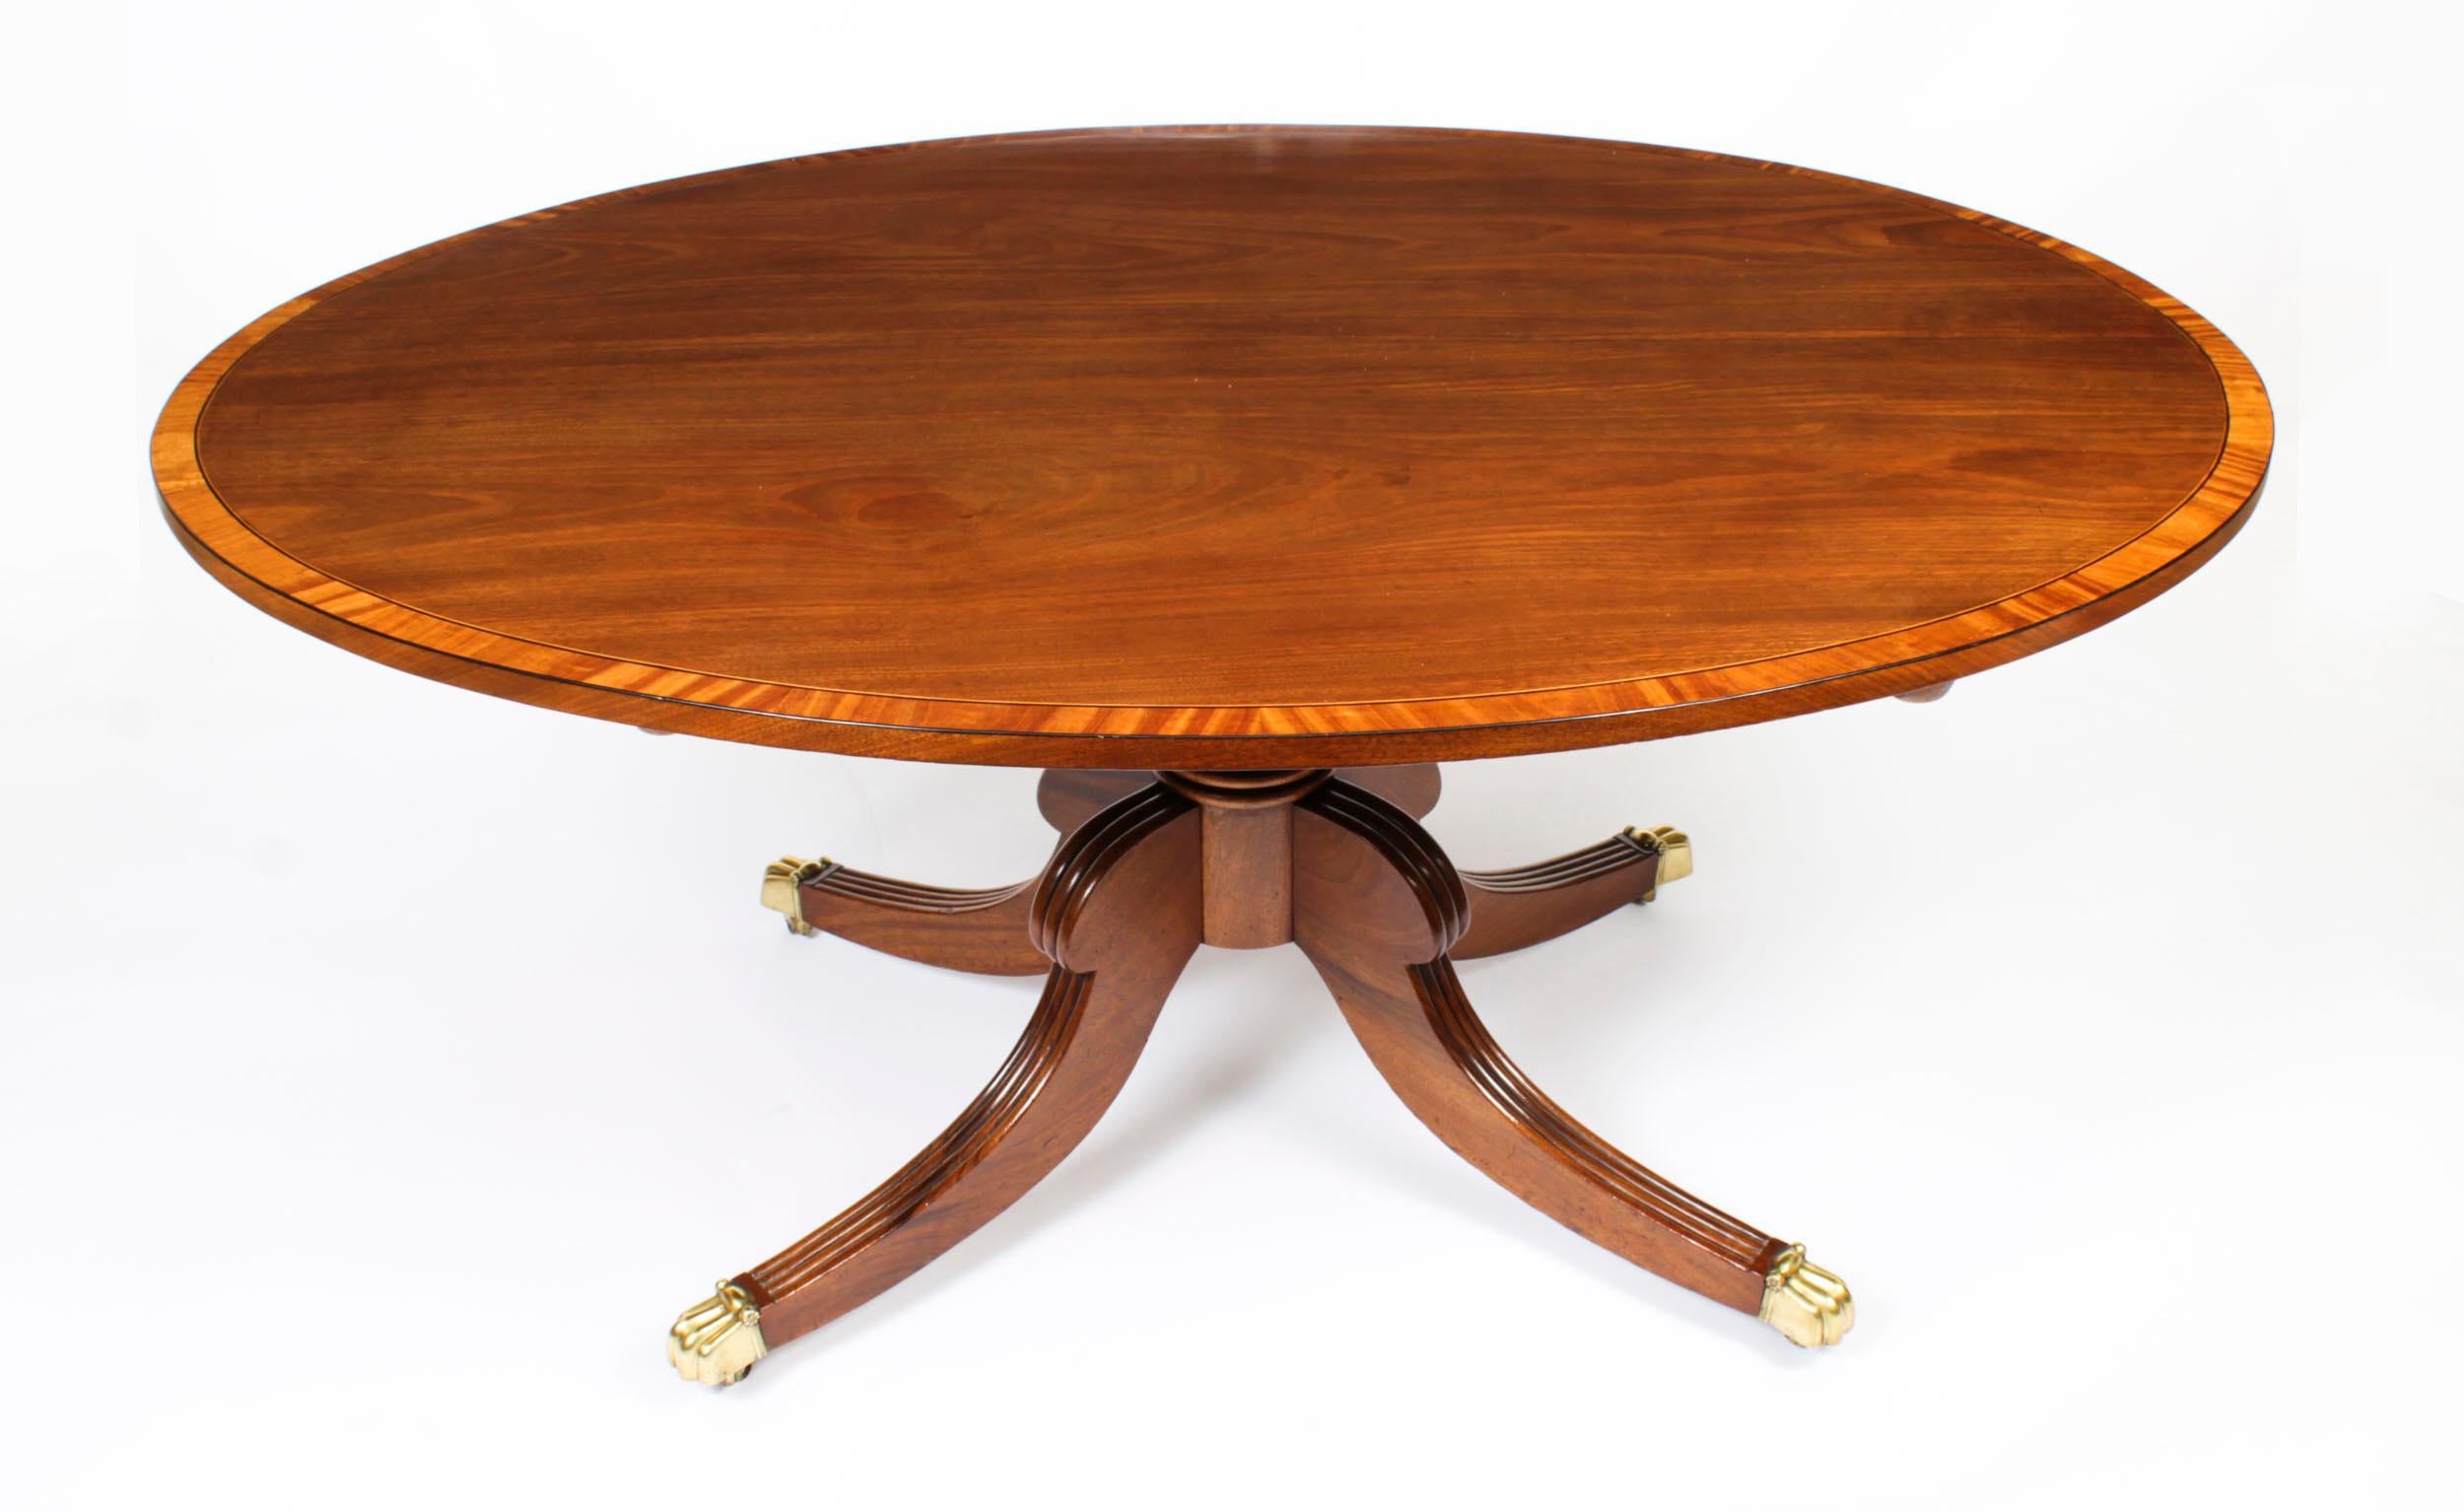 Antique Oval Regency Flame Mahogany Dining Table 19th C For Sale 11